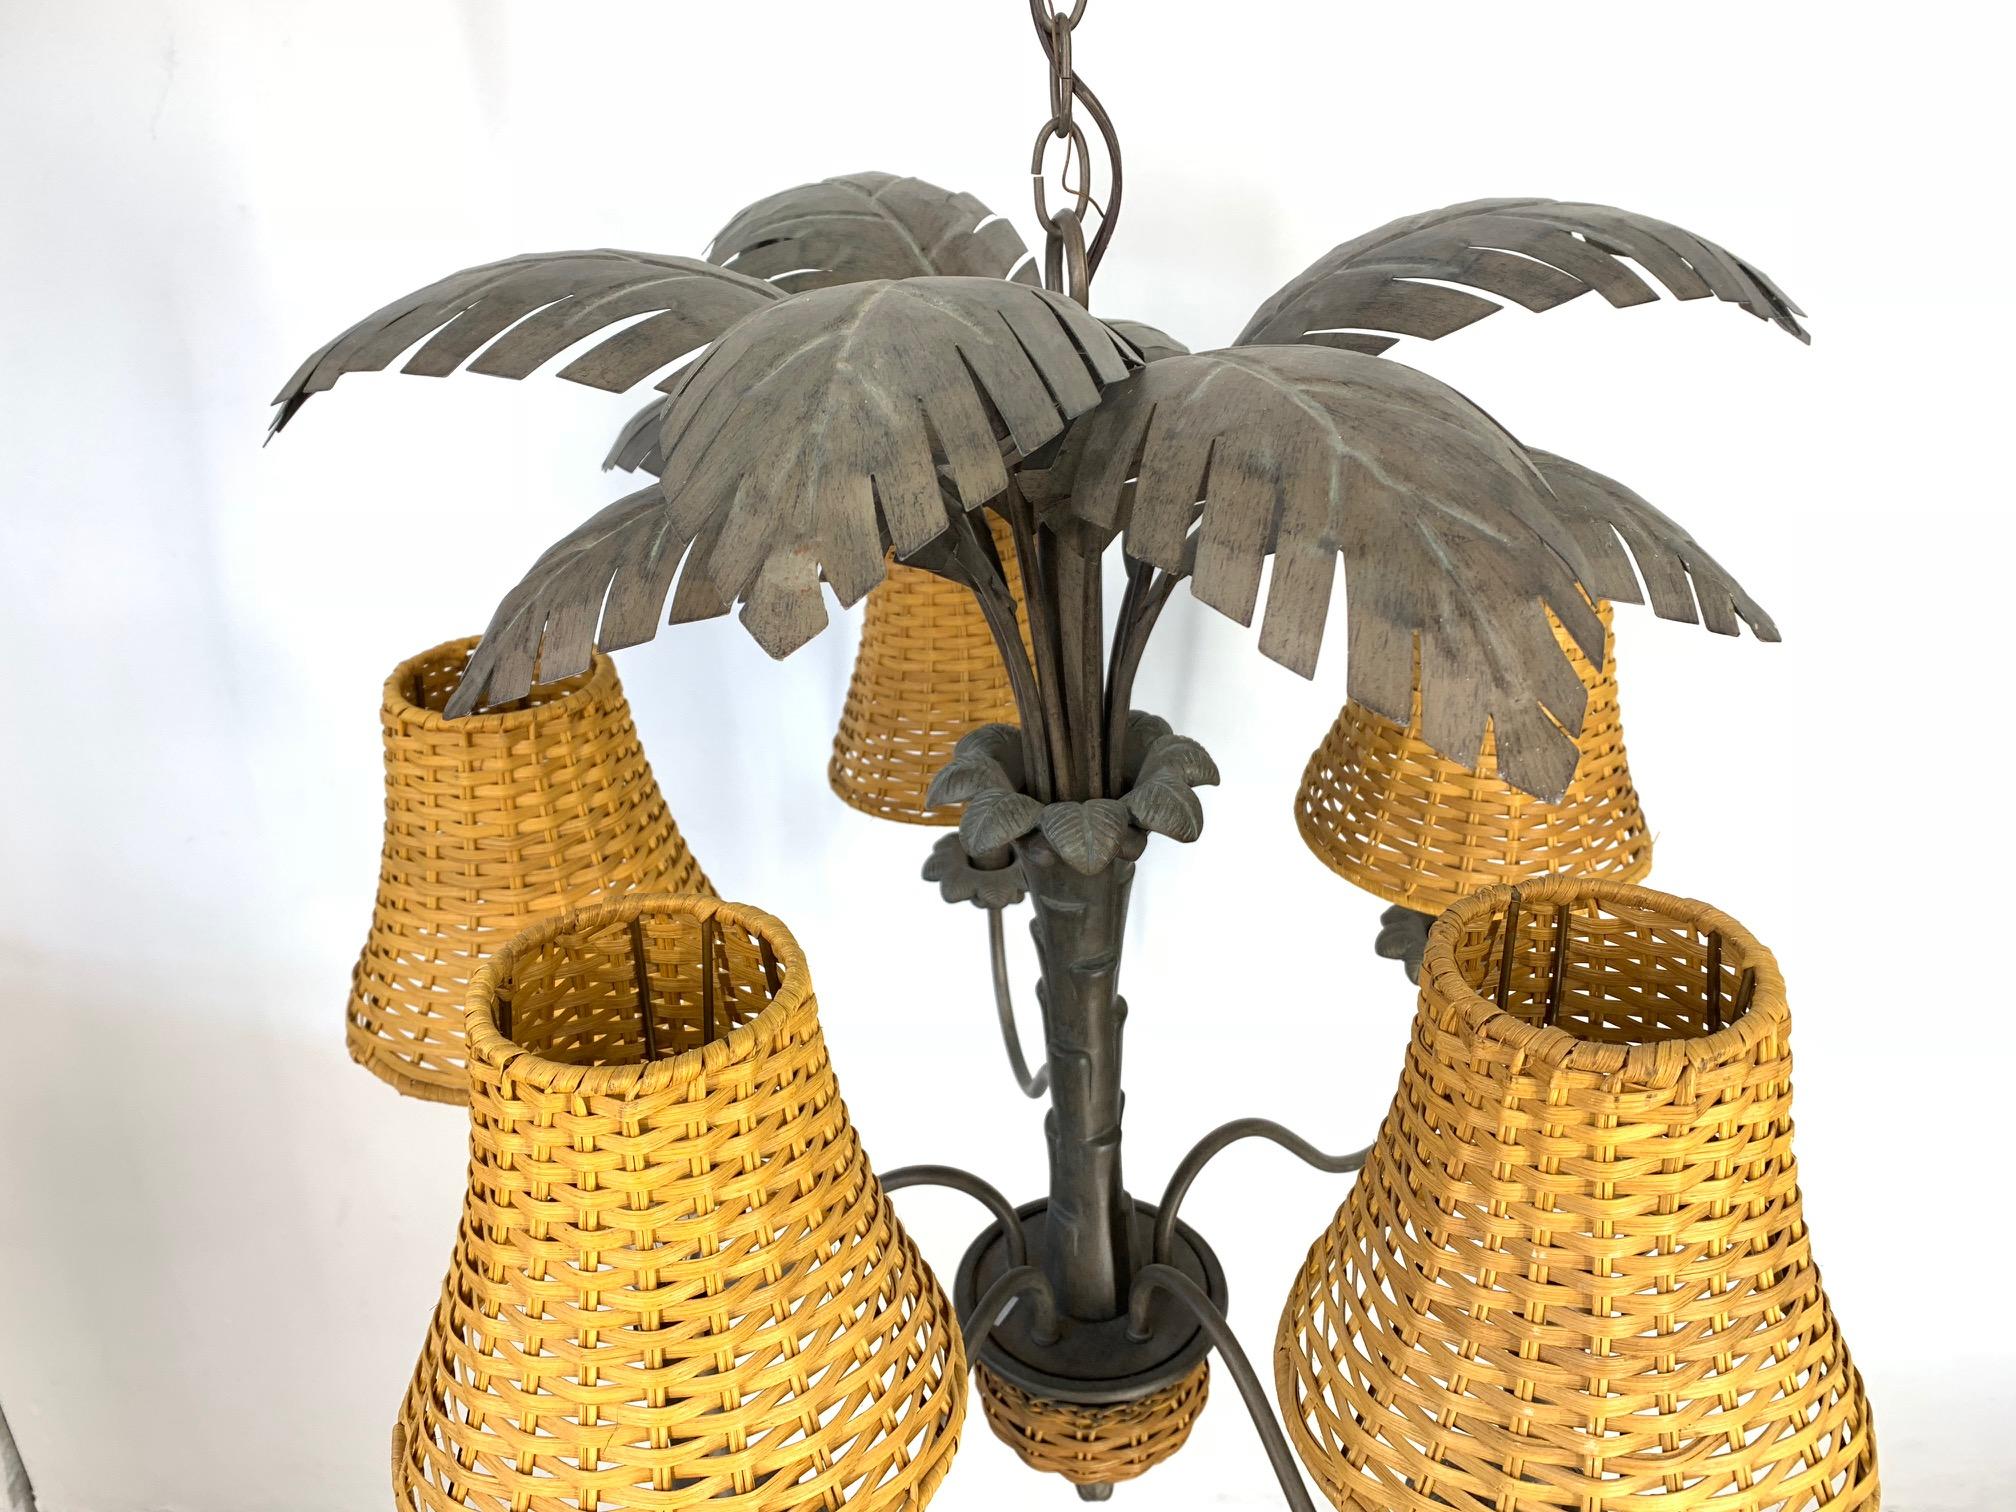 Sculptural midcentury Palm tree chandelier features rattan shades and accents. Includes chain and ceiling cap. Very good vintage condition.